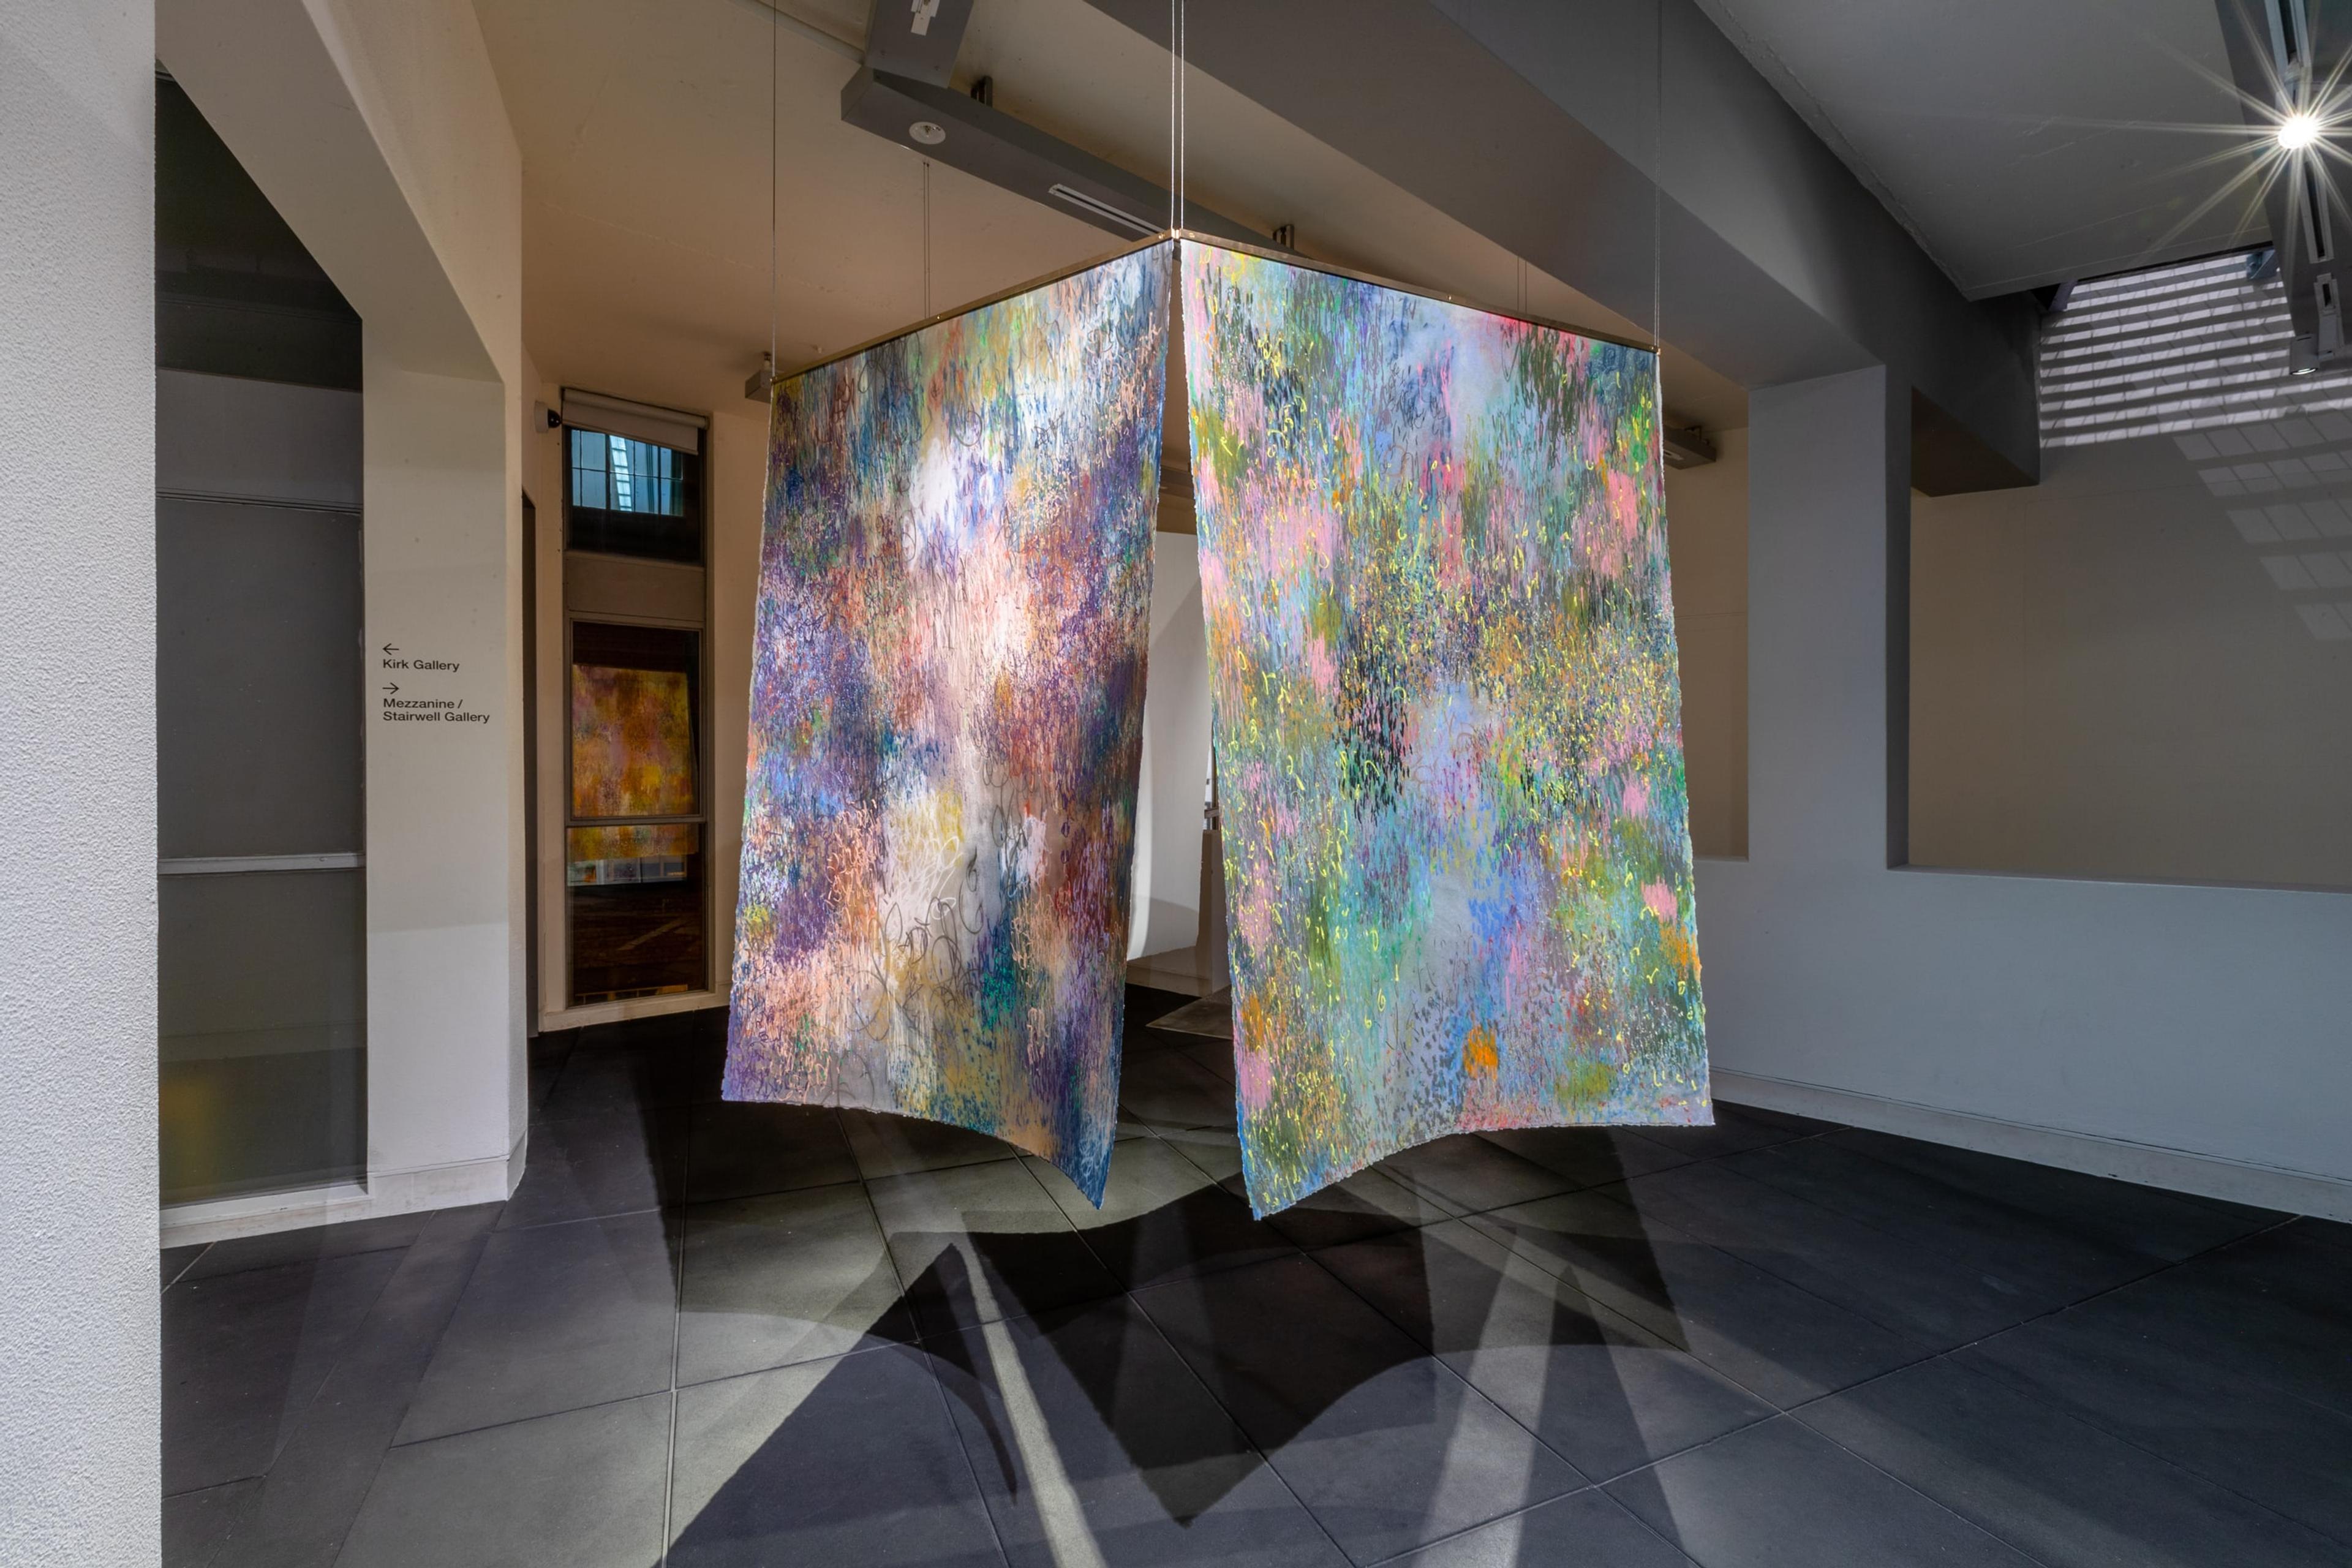 Installation view, Discharge (2022), in Energy Work: Kathy Barry/Sarah Smuts Kennedy, Te Pātaka Toi Adam Art Gallery, Victoria University of Wellington. Photo: Ted Whitaker